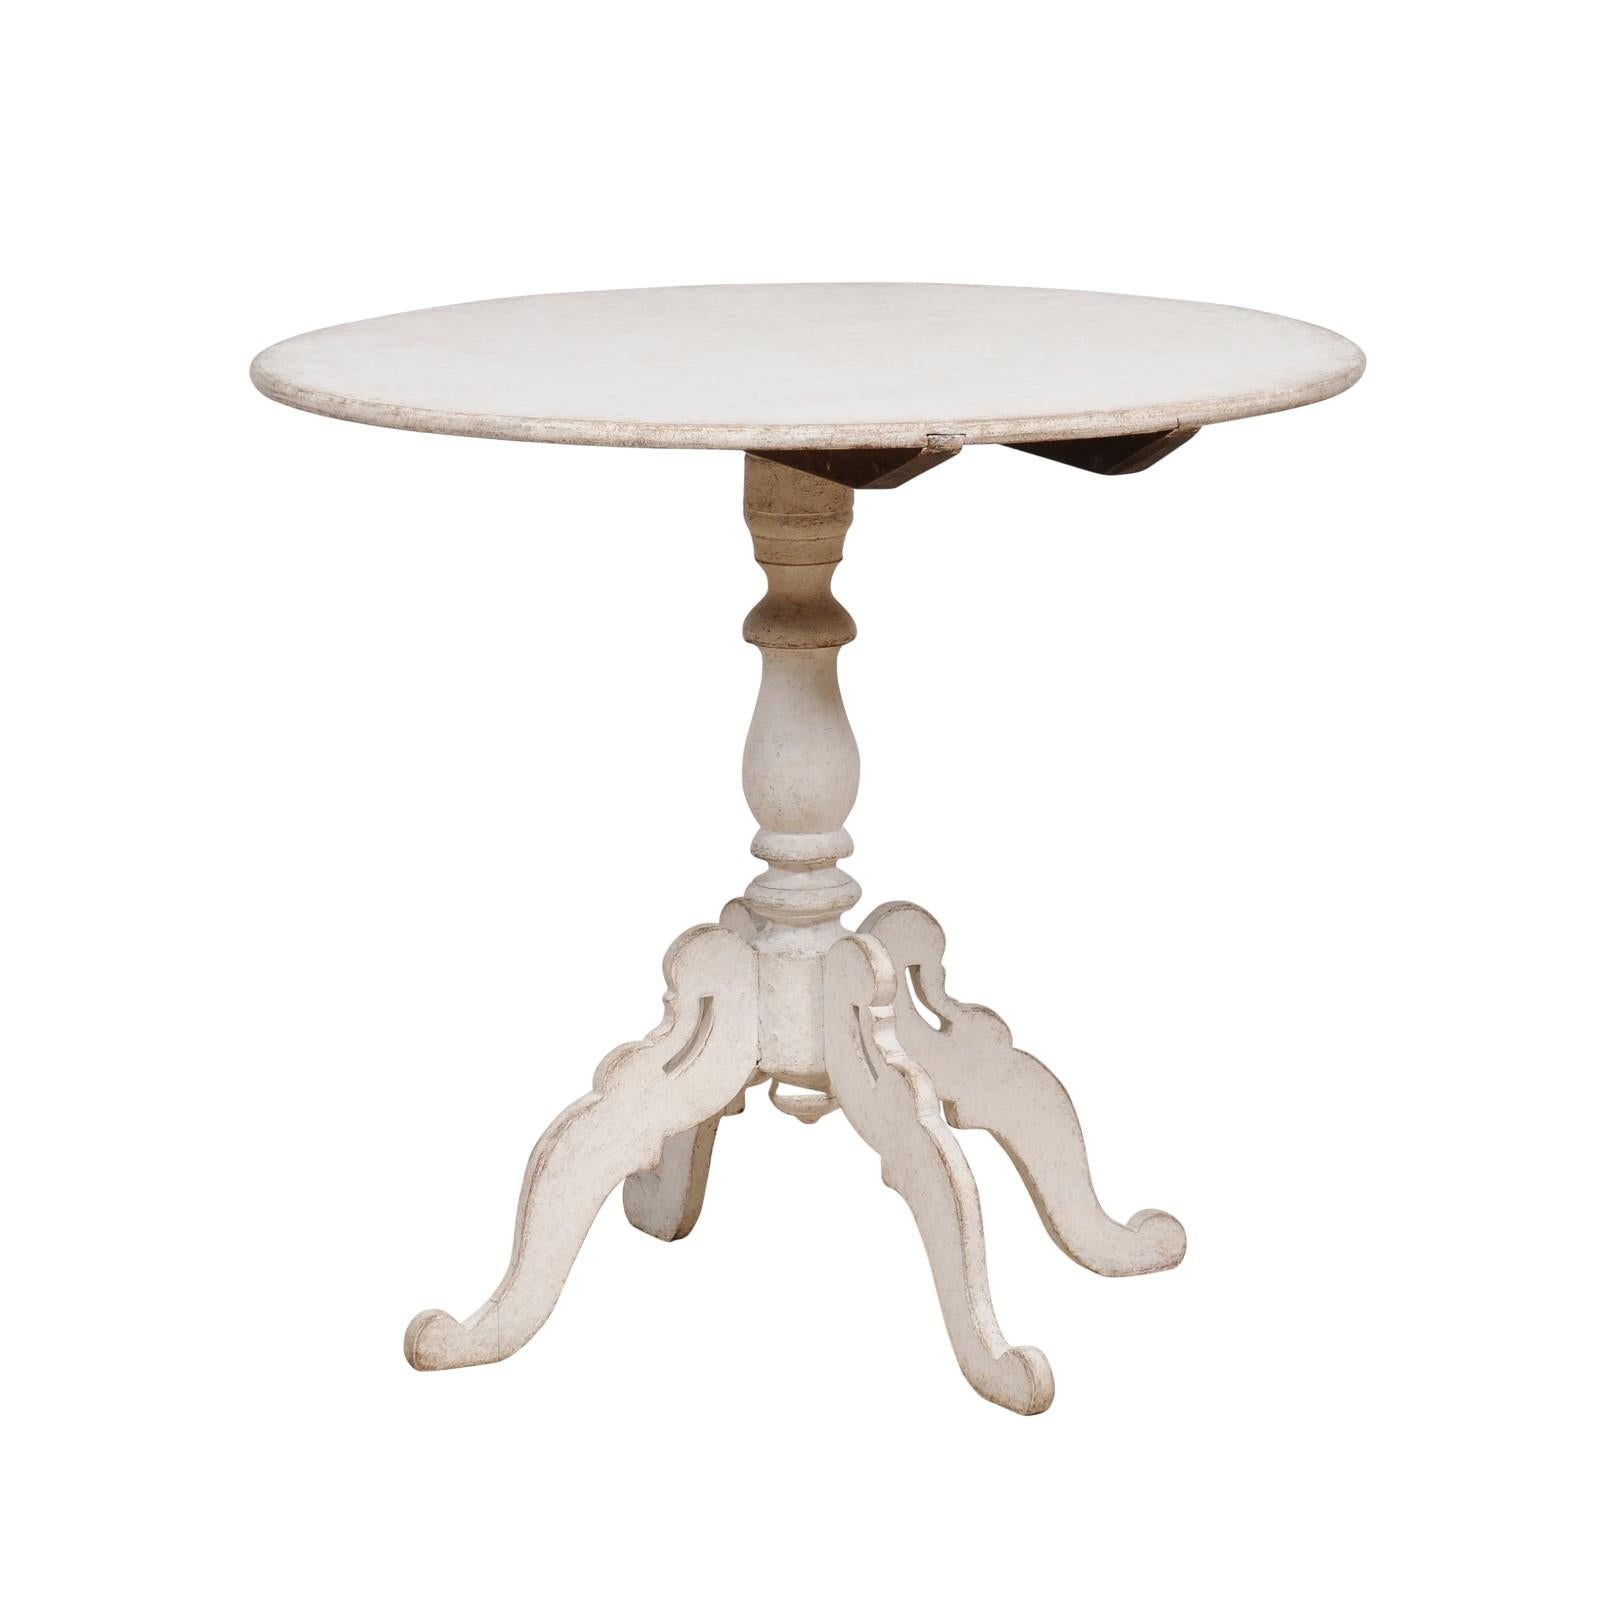 A Swedish light grey painted tilt-top table from circa 1860 with circular top and turned pedestal mounted on four carved scrolling legs. Heralding from circa 1860, this Swedish tilt-top table is a striking blend of functionality and artistry, bathed